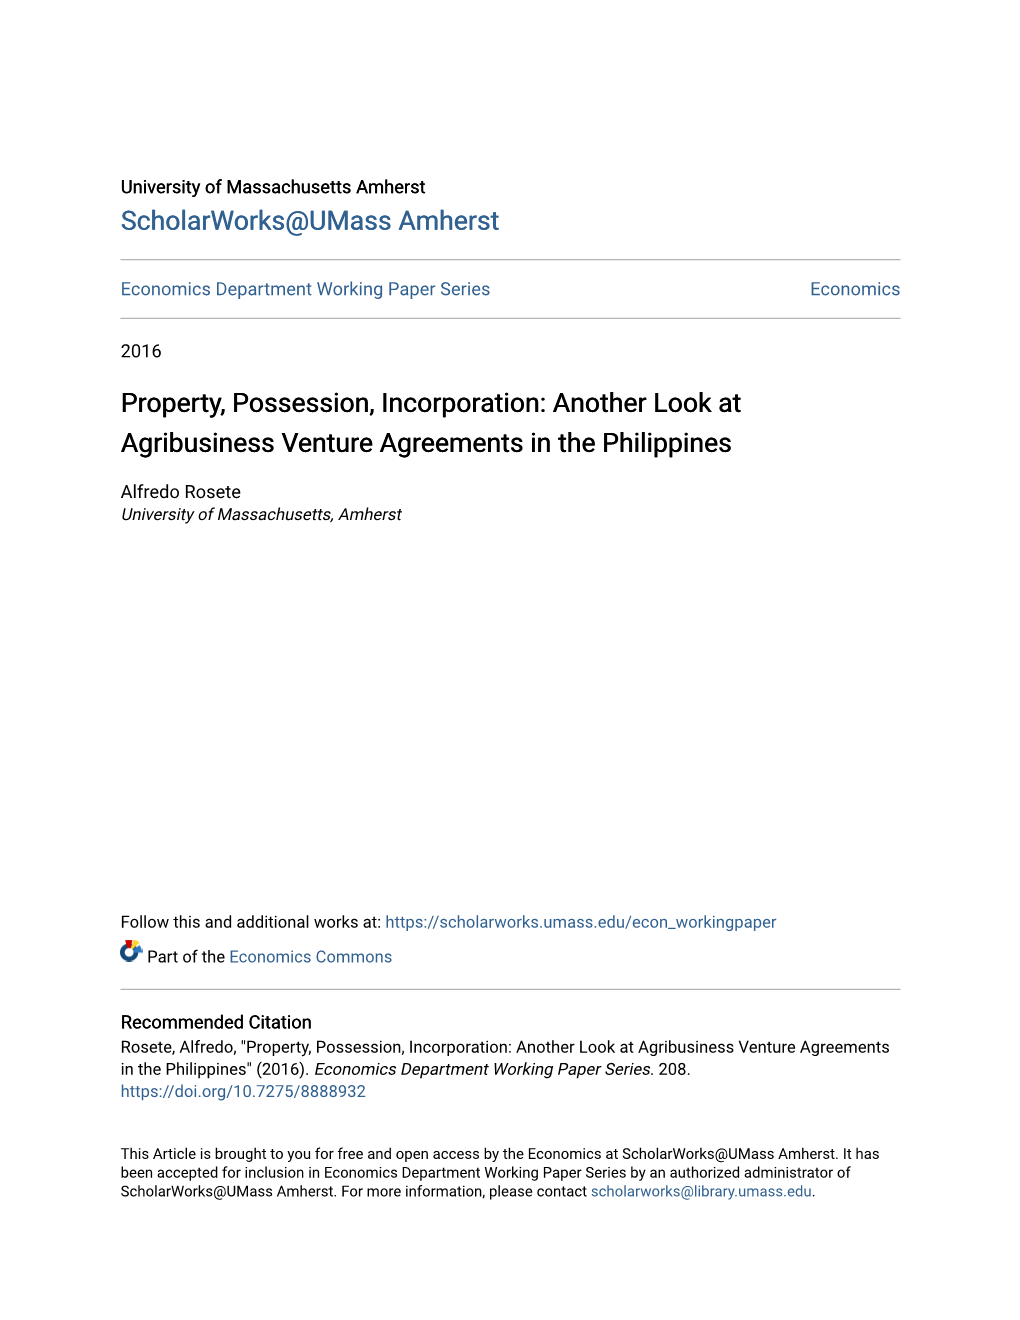 Another Look at Agribusiness Venture Agreements in the Philippines